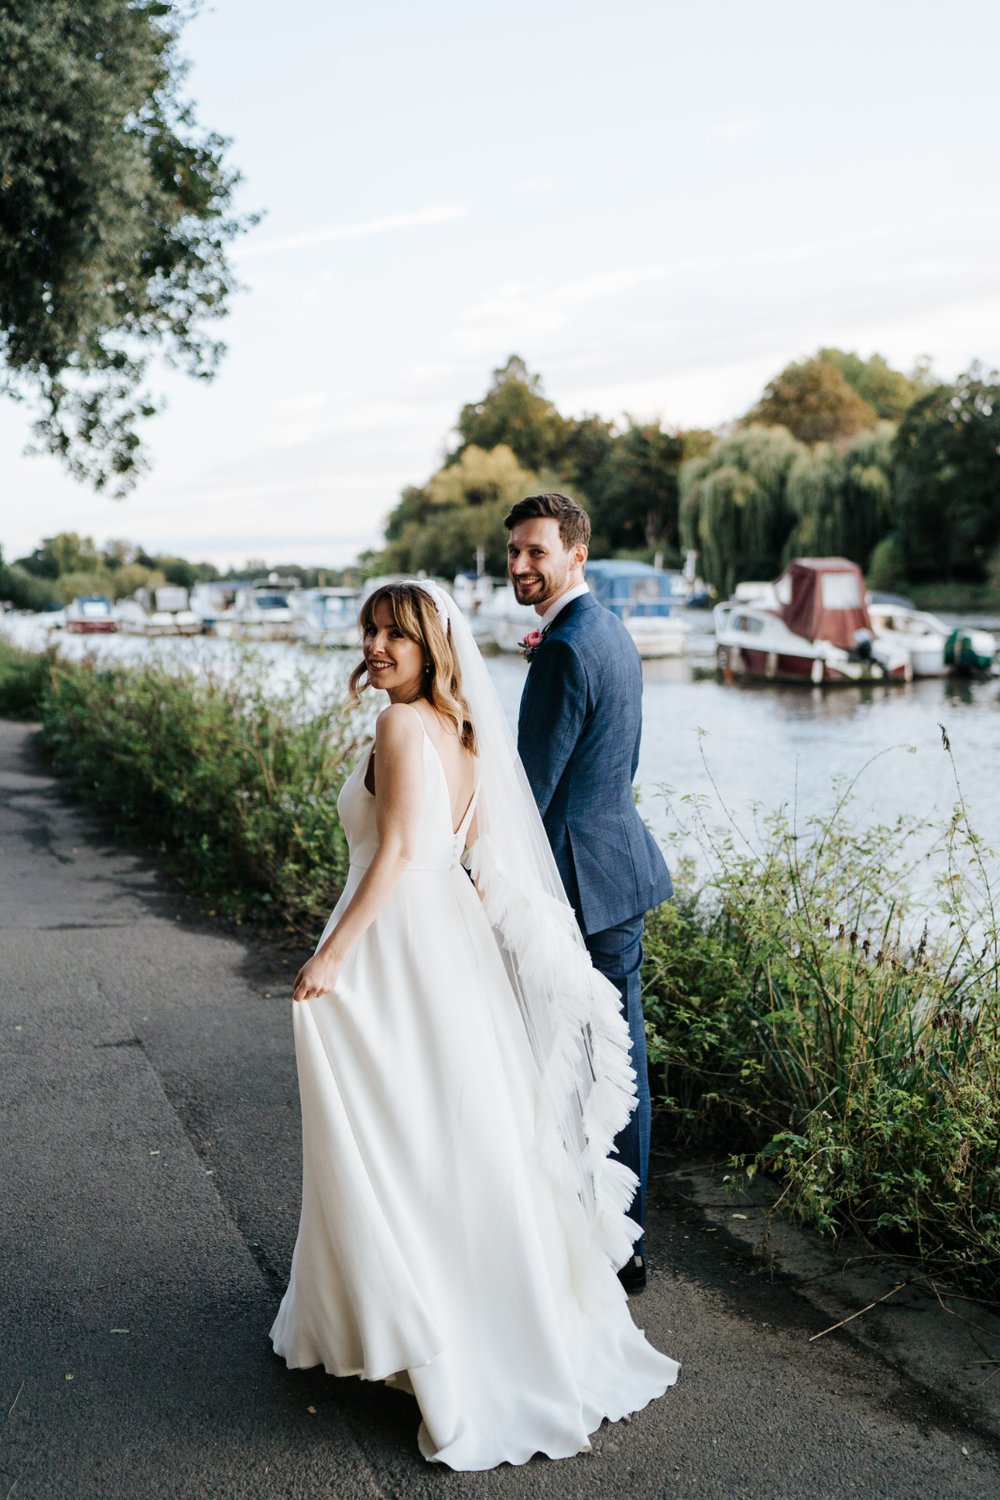 Bride and groom walk away from camera and look towards it over their shoulder during photo session on Richmond Riverside